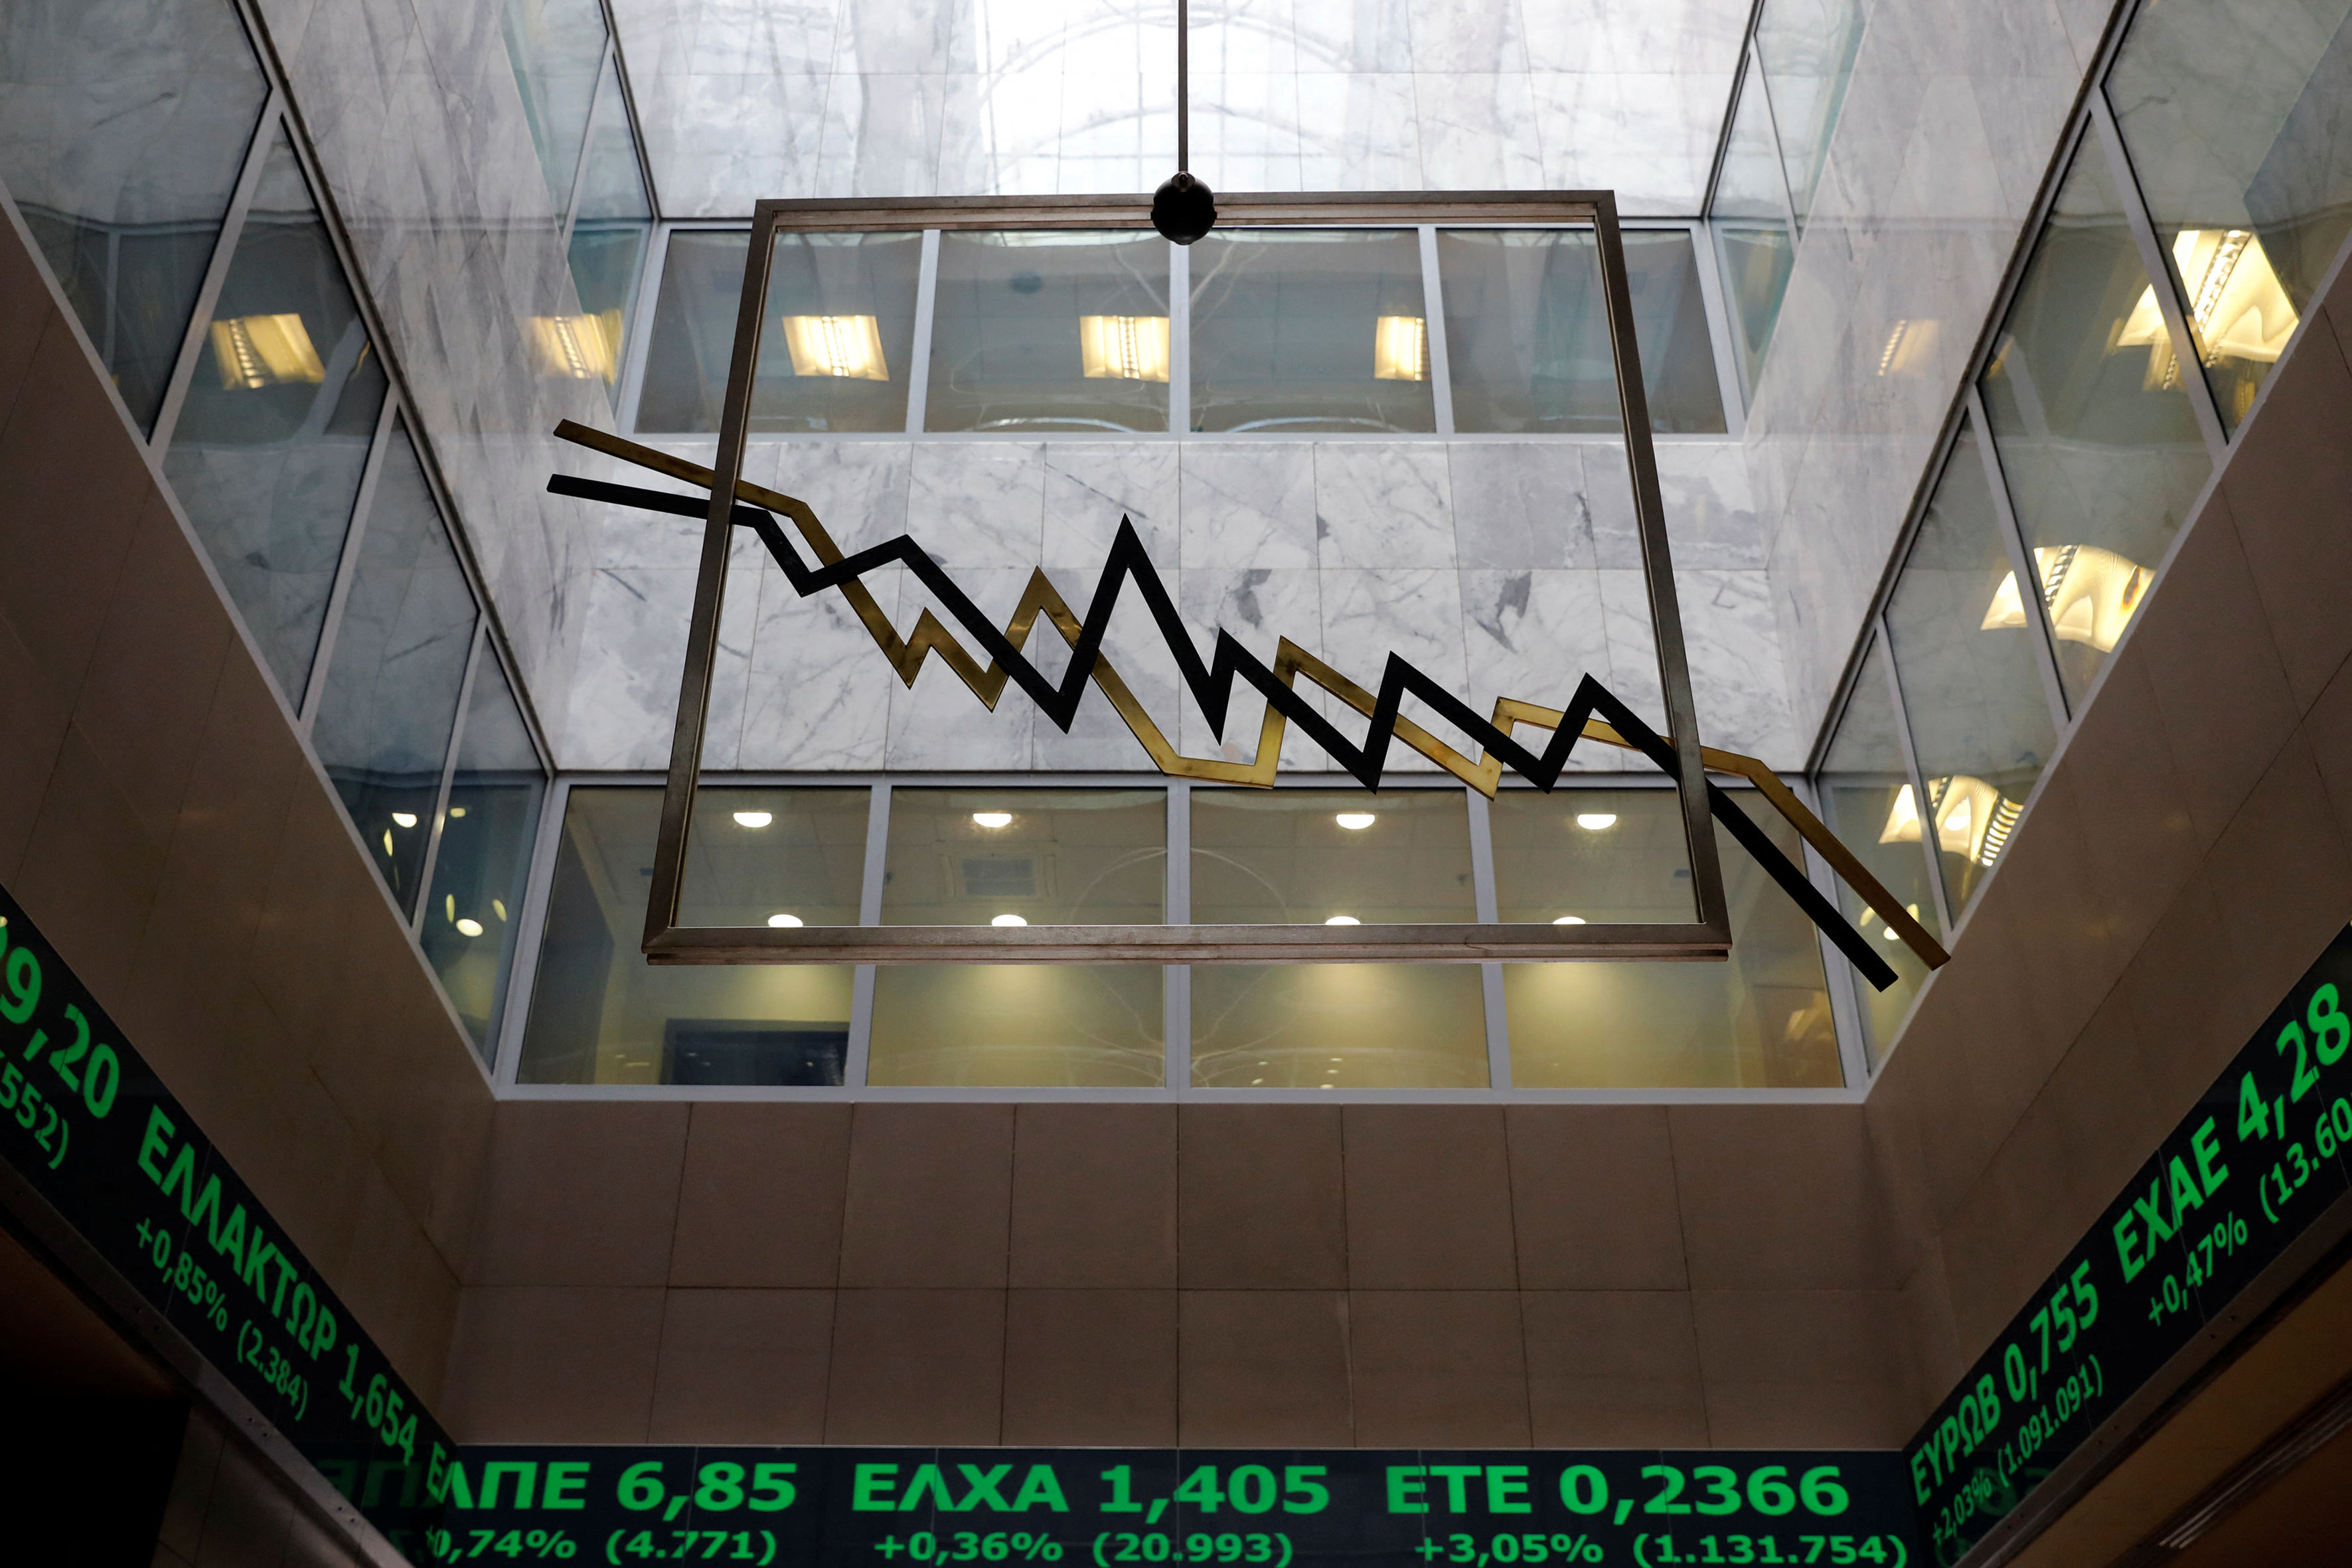 A stock ticker shows stock options at the lobby of the Athens stock exchange building in Athens